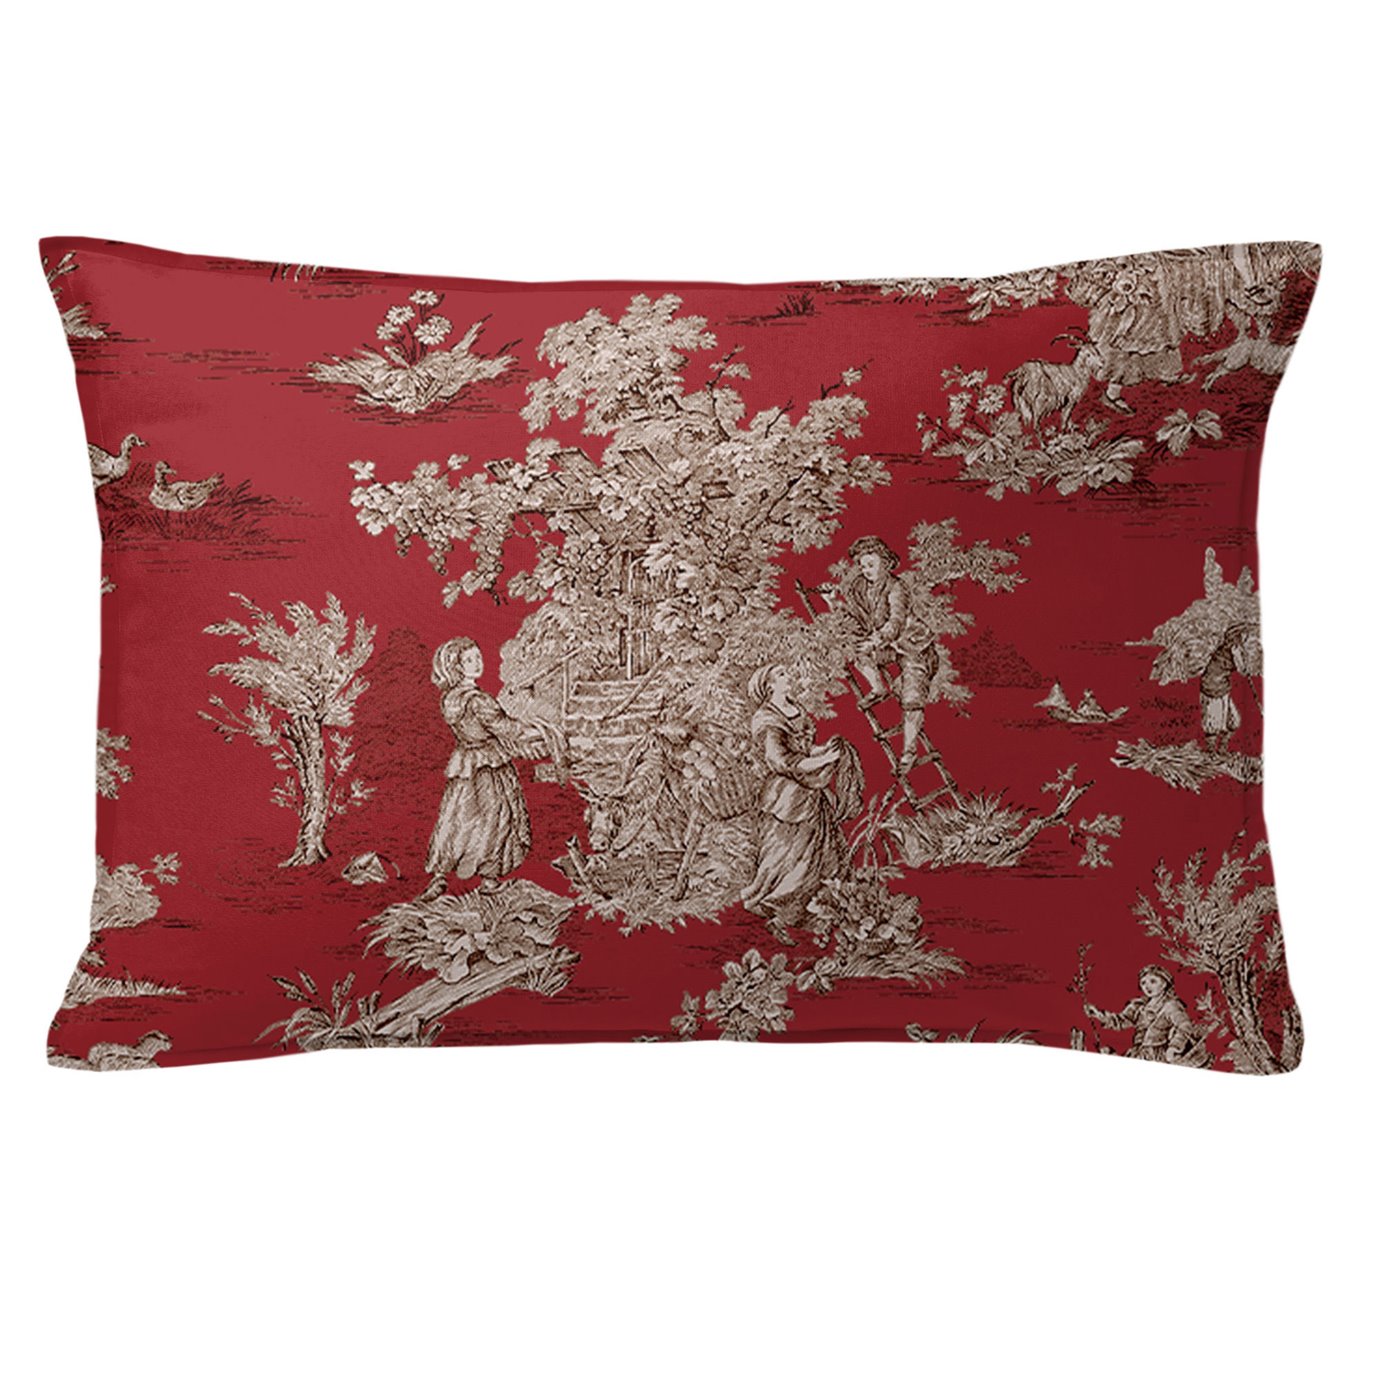 Chateau Red/Black Decorative Pillow - Size 14"x20" Rectangle